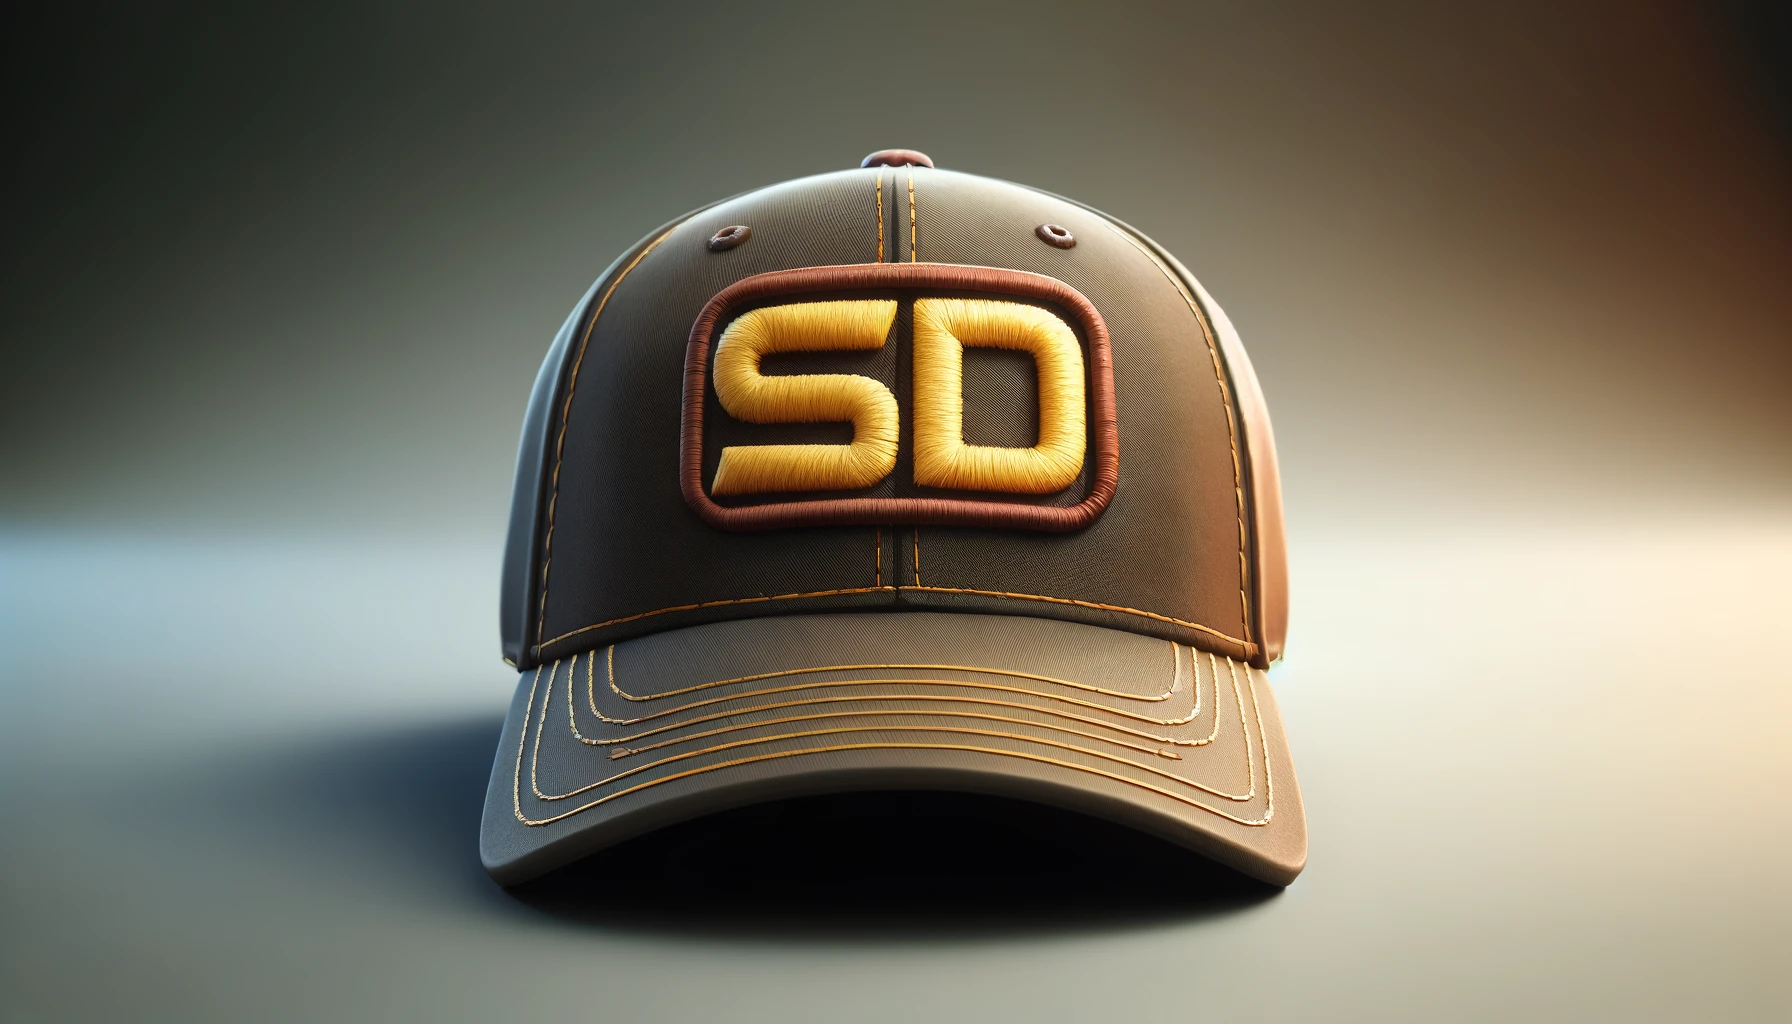 A popular cap with a large logo in yellow and brown in the center, SD letters included, with the front logo blurred, missing, or not visible. Horizontal aspect ratio (16:9).